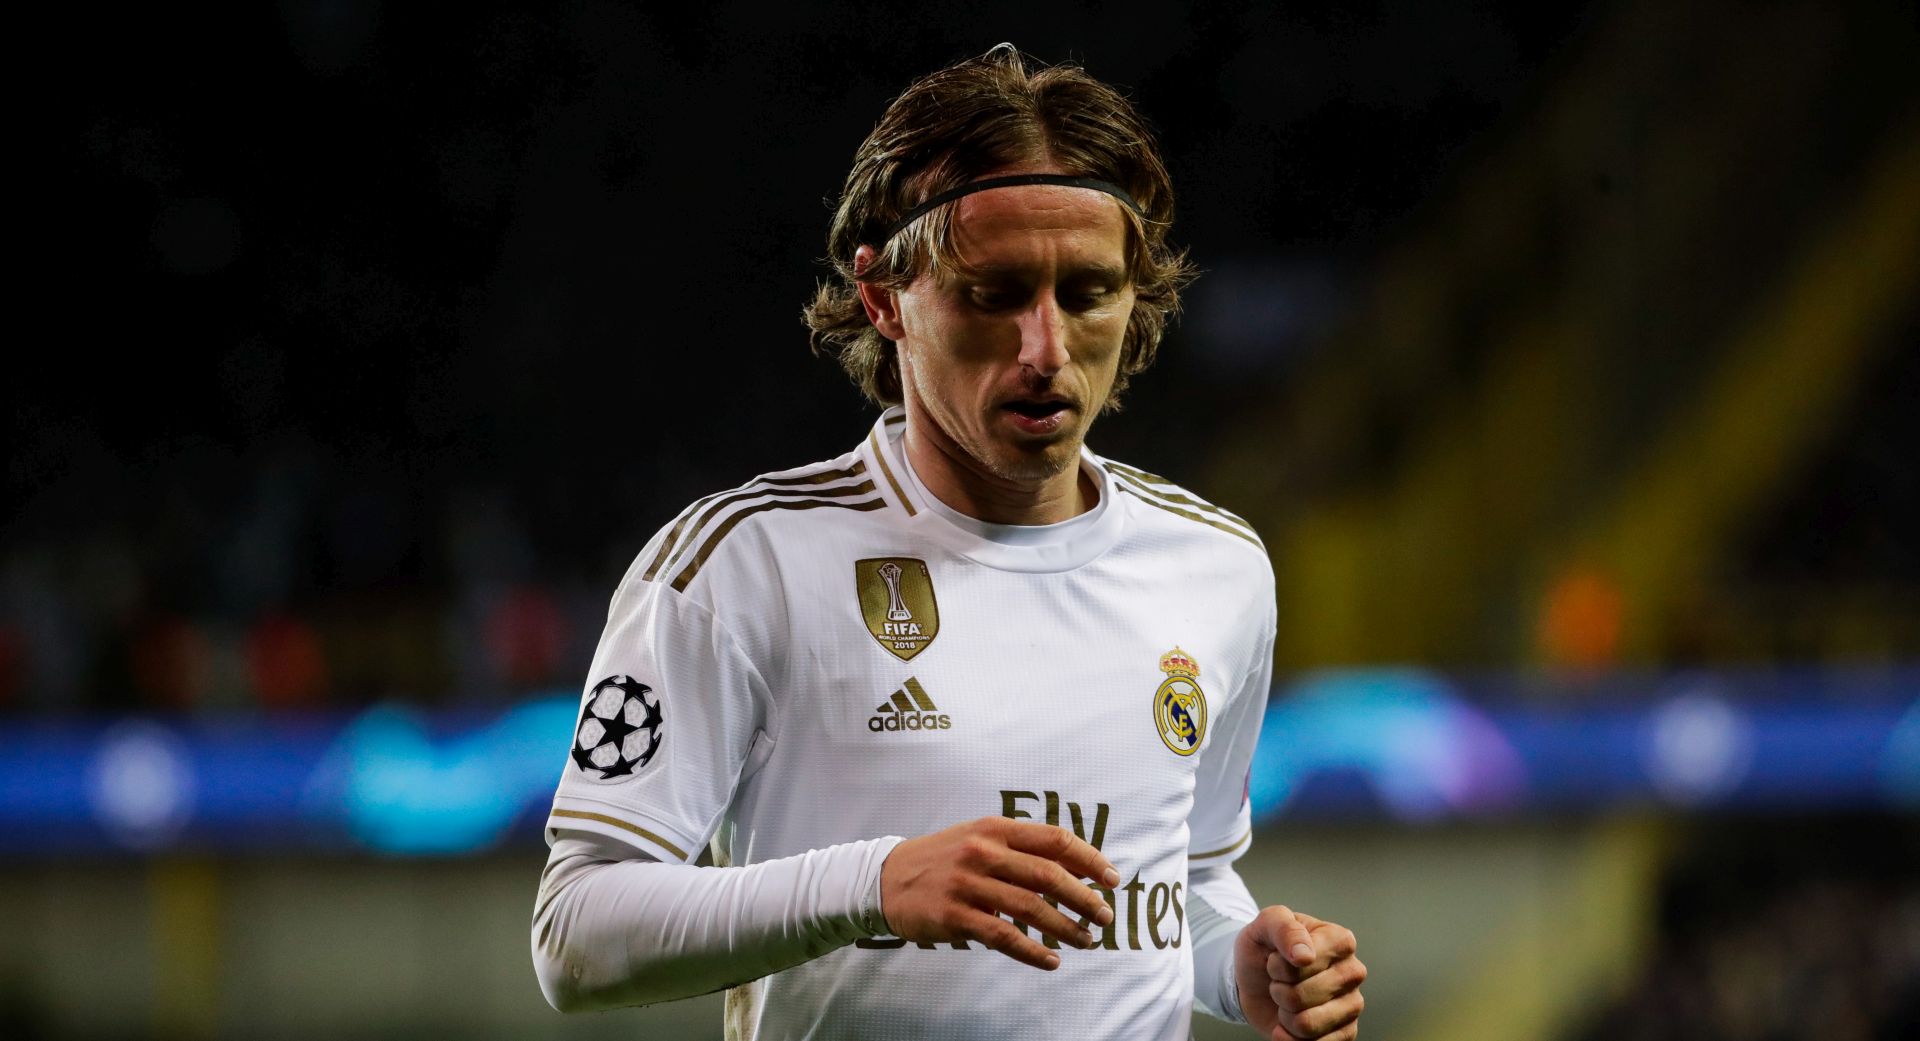 epa08063508 Luka Modric of Real Madrid in action during the UEFA Champions League group A match between Club Brugge and Real Madrid in Bruges, Belgium, 11 December 2019.  EPA/STEPHANIE LECOCQ